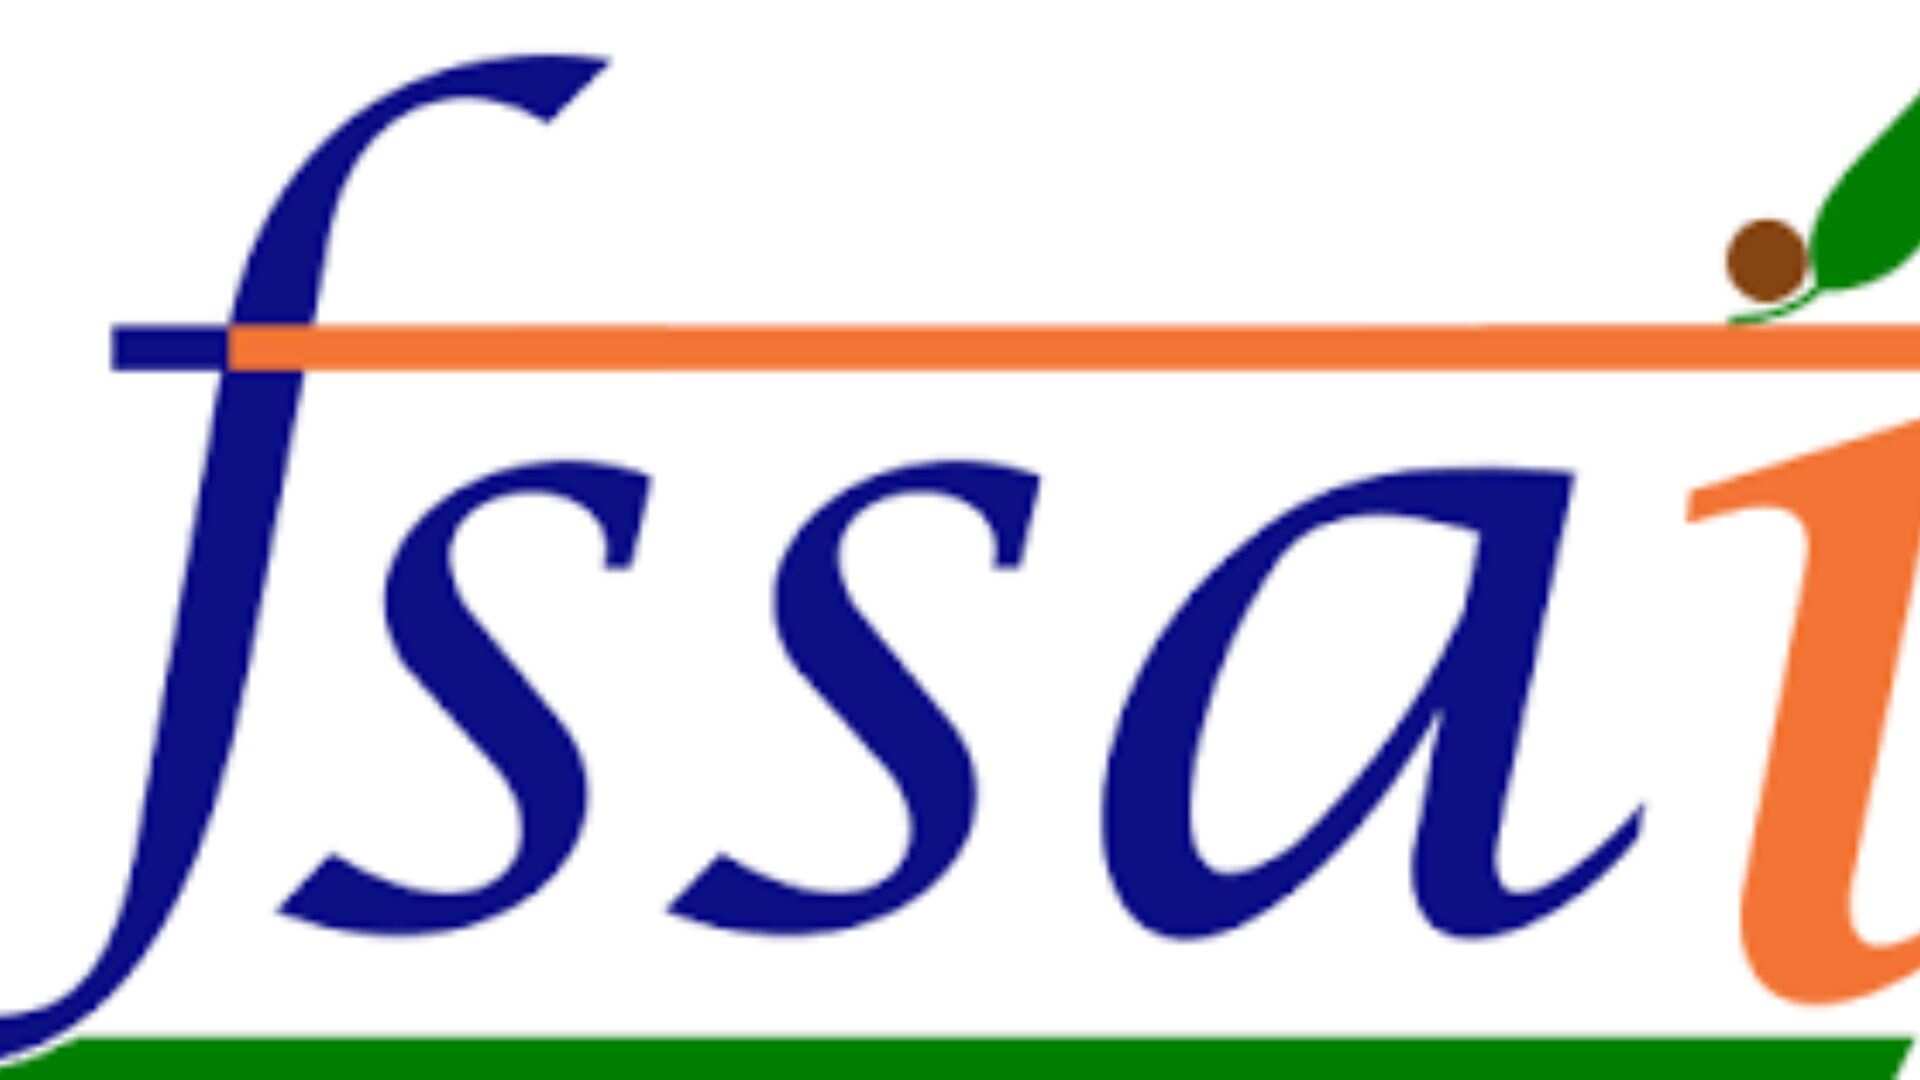 FSSAI Denies Reports On Elevated Pesticide Residue Levels In Herbs And Spices